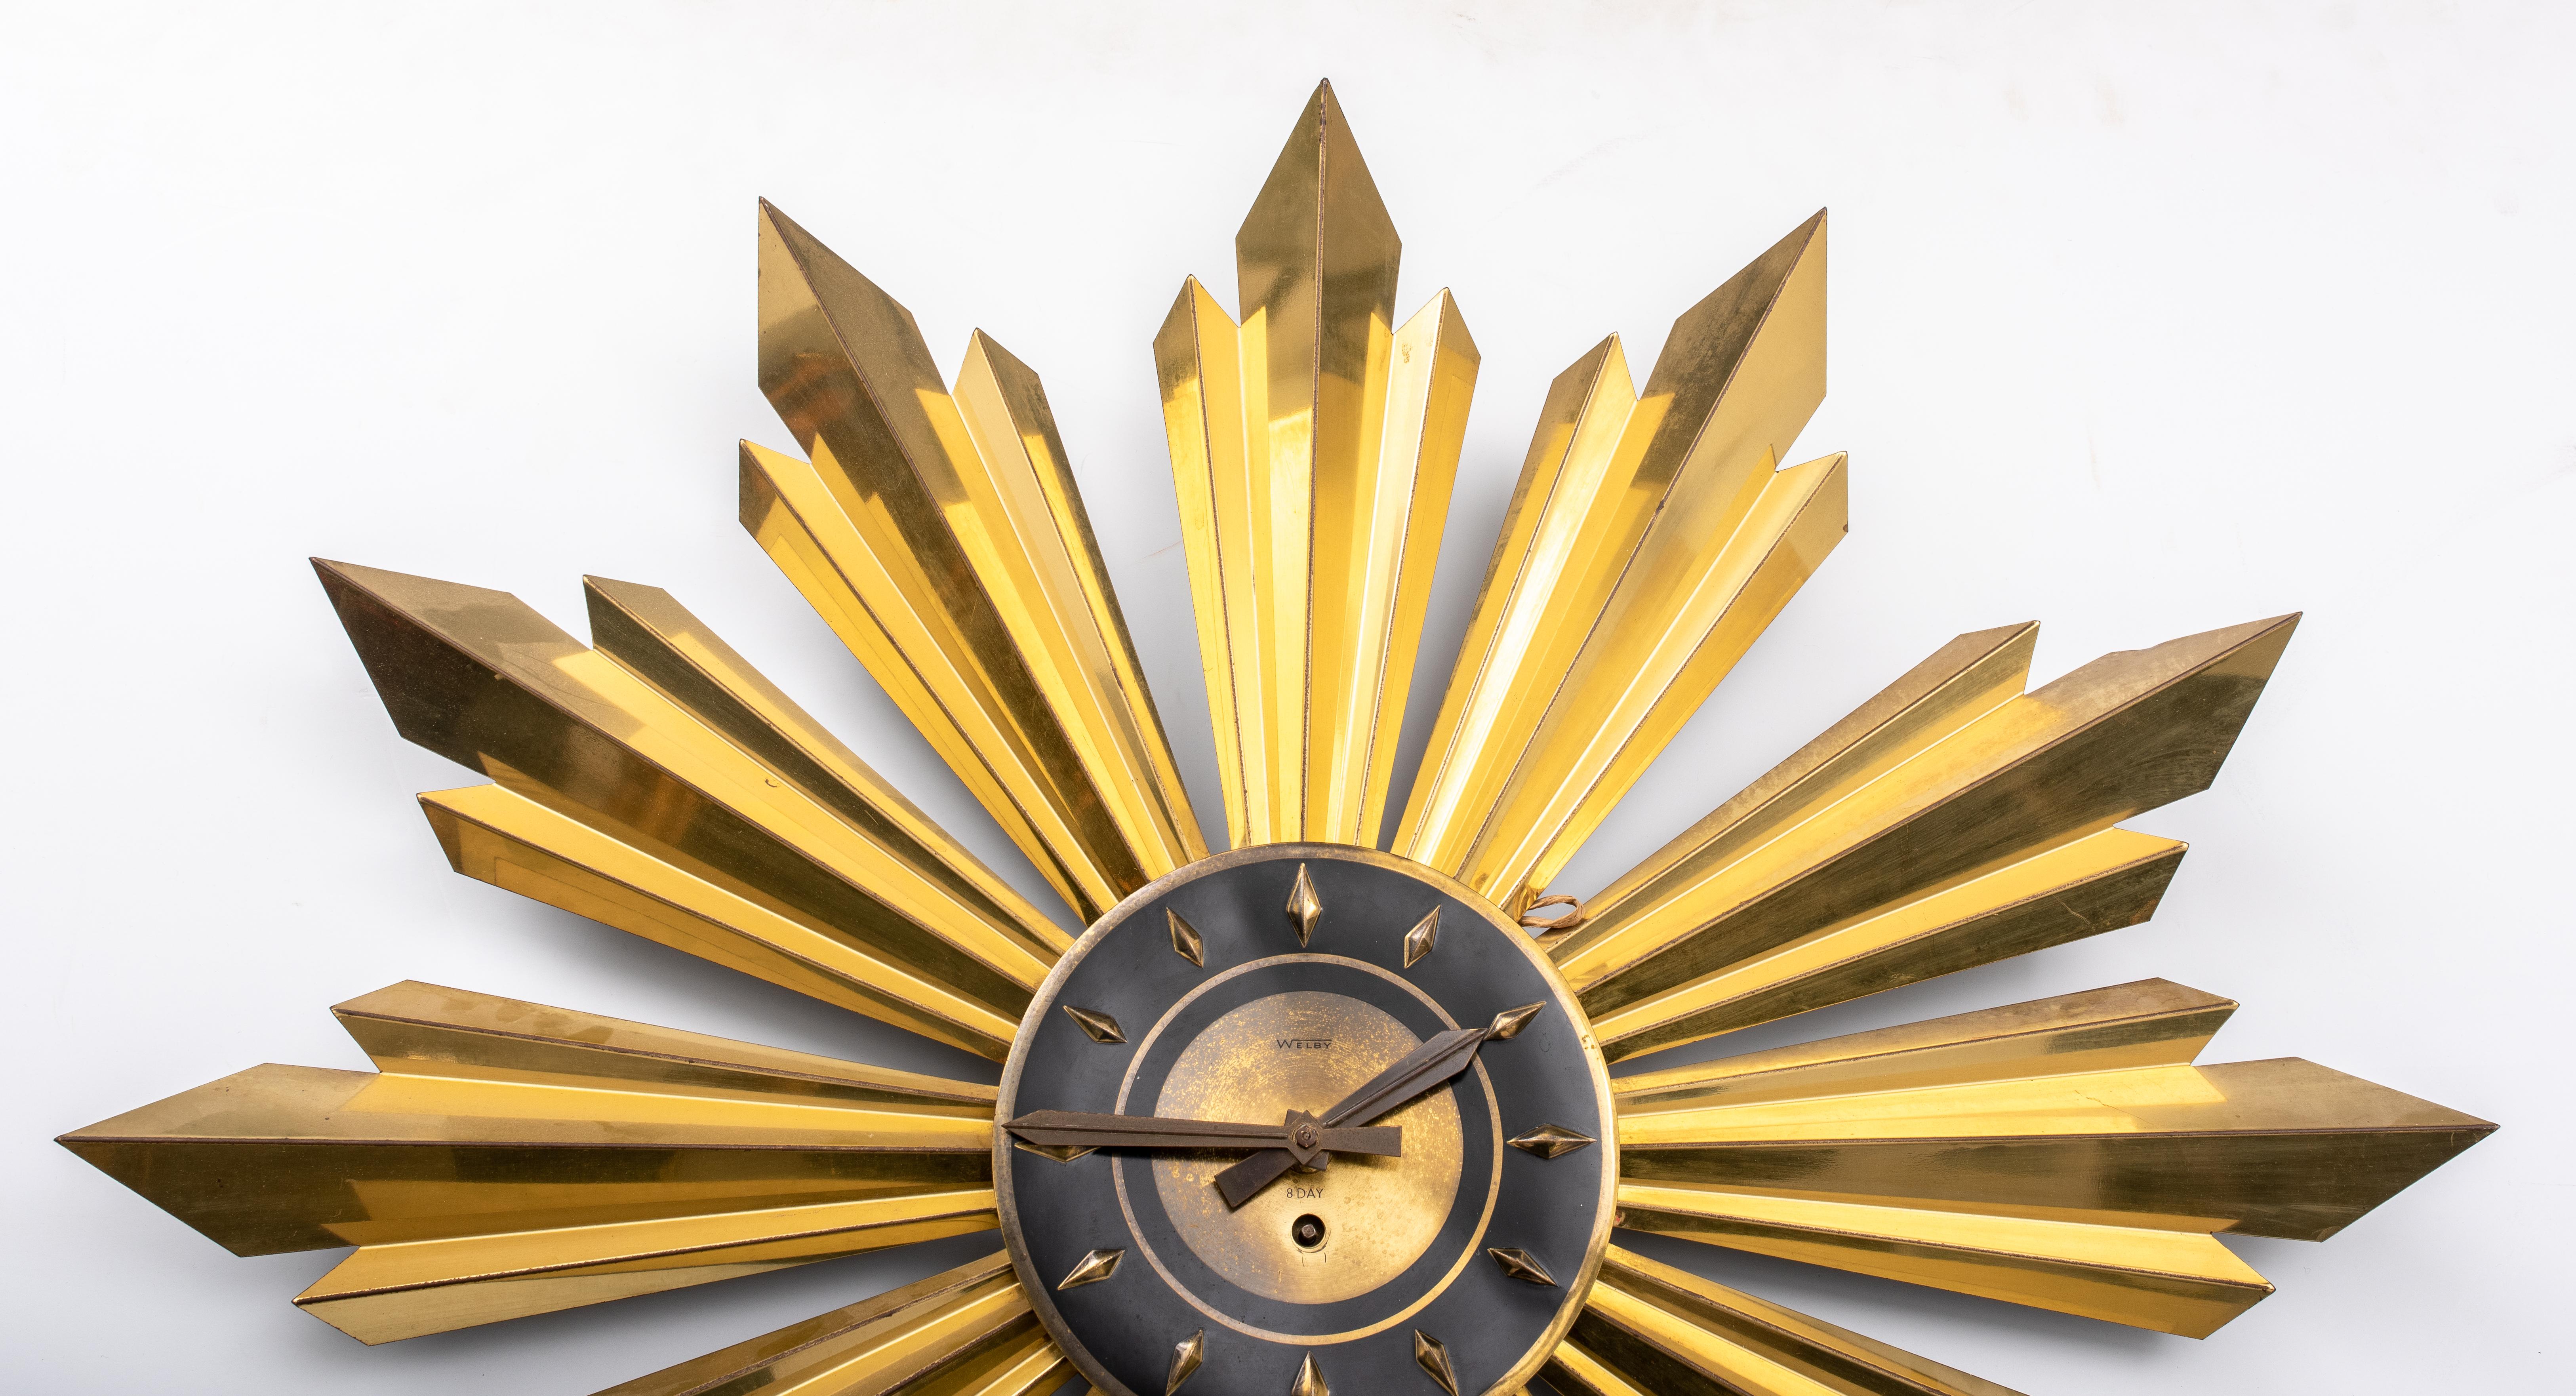 Mid-Century Modern sunburst wall clock in patinated and burnished brass, with 12 multi-faceted rays in splendor, the clock with blind dial. 

Measures: 27